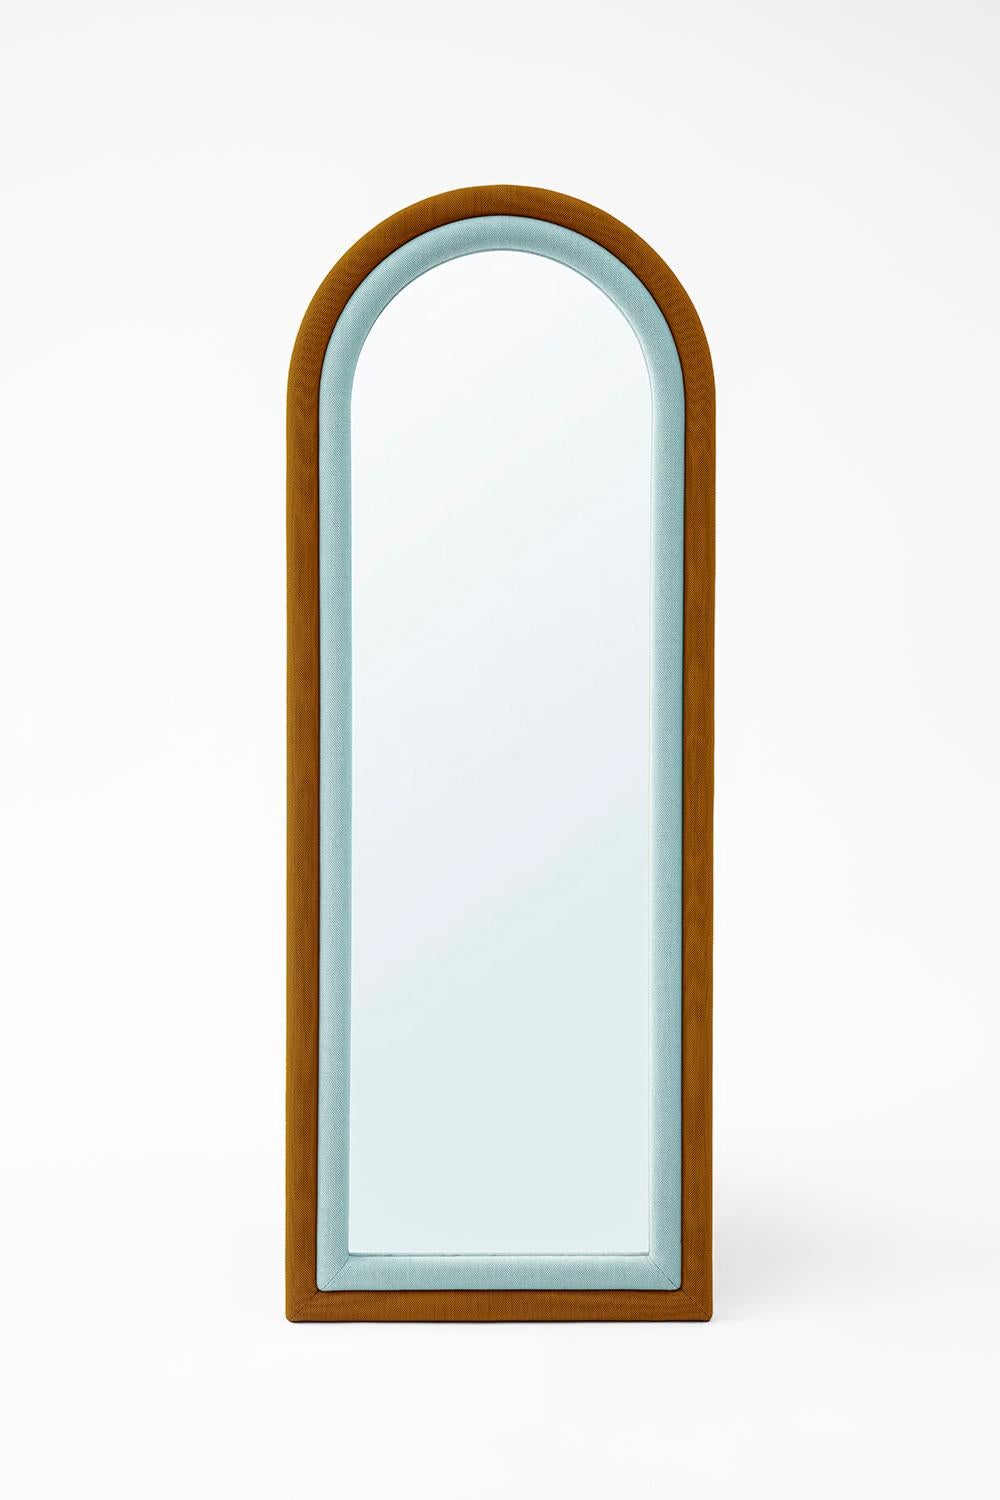 Contemporary Upholstered Iris Floor Mirror, Mustard and Blue In New Condition For Sale In New York, NY